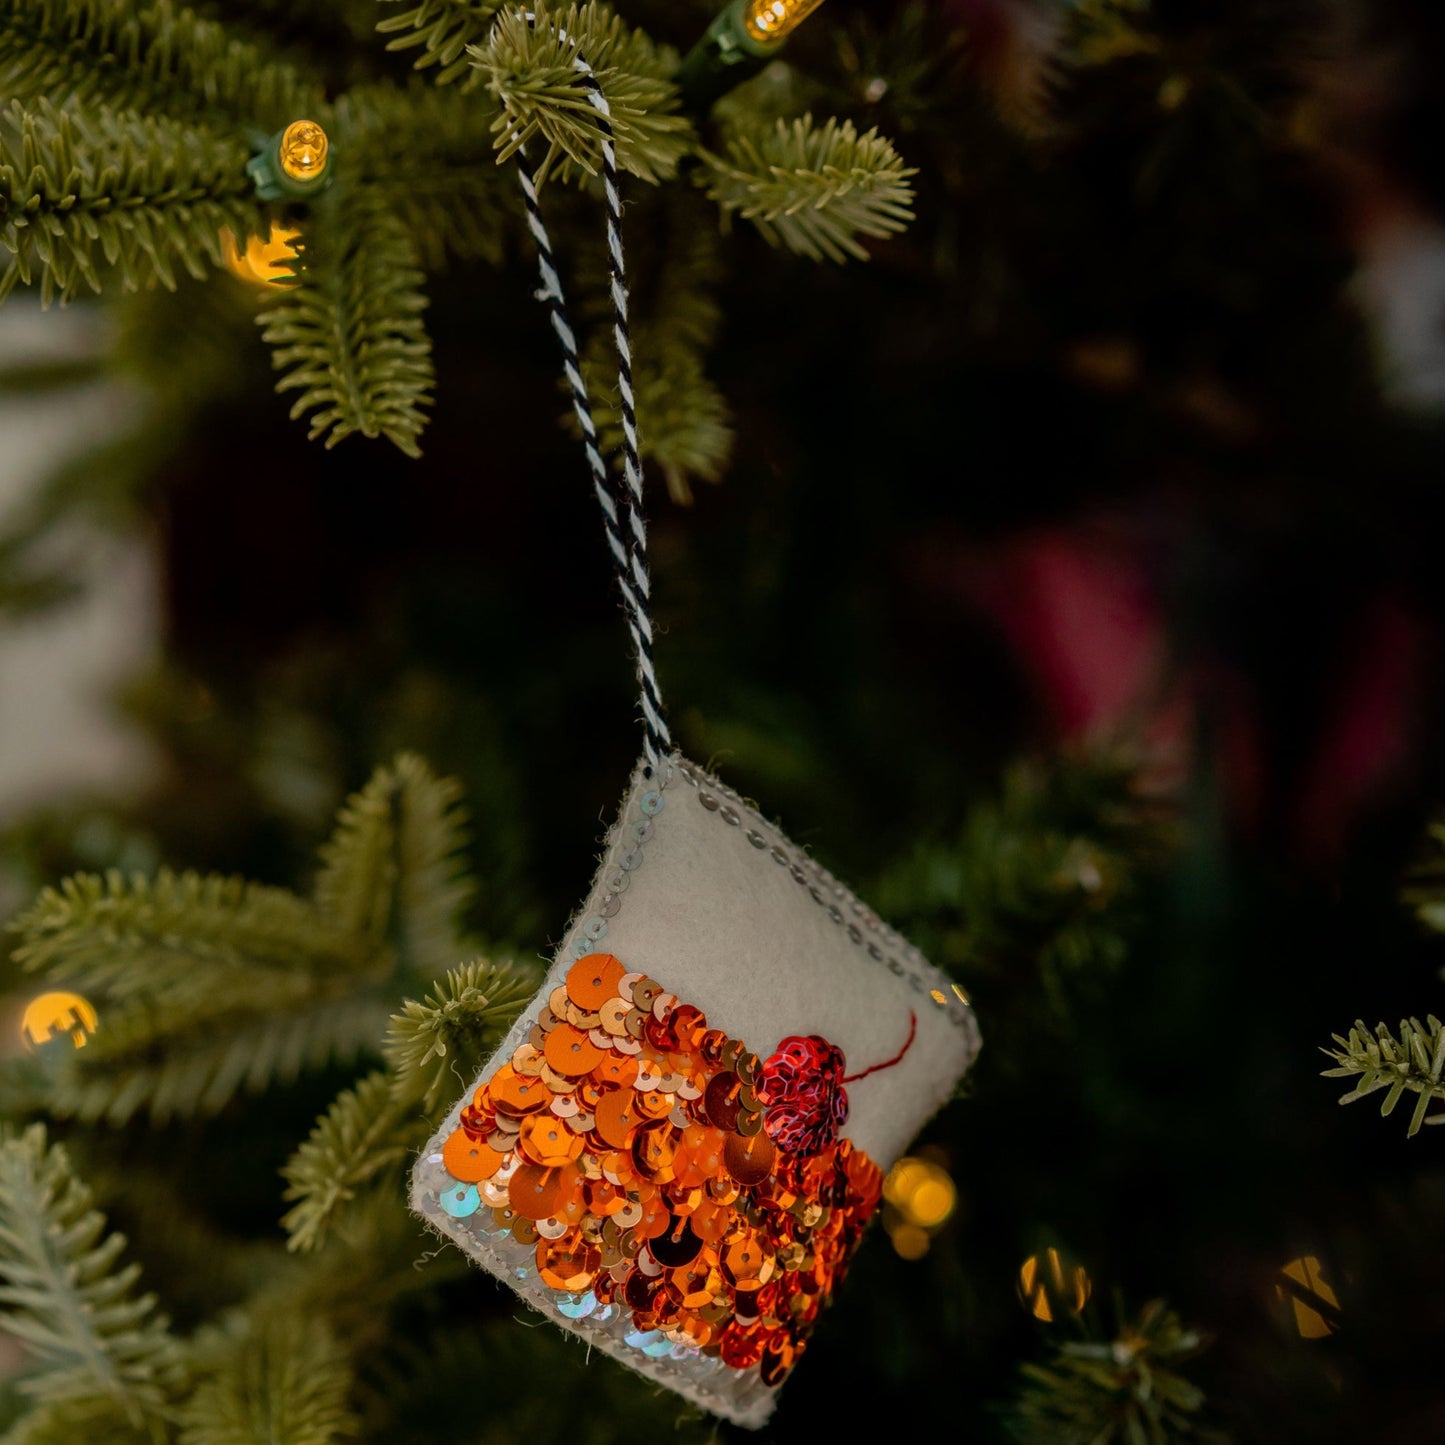 The Old Fashioned Hanging Ornament